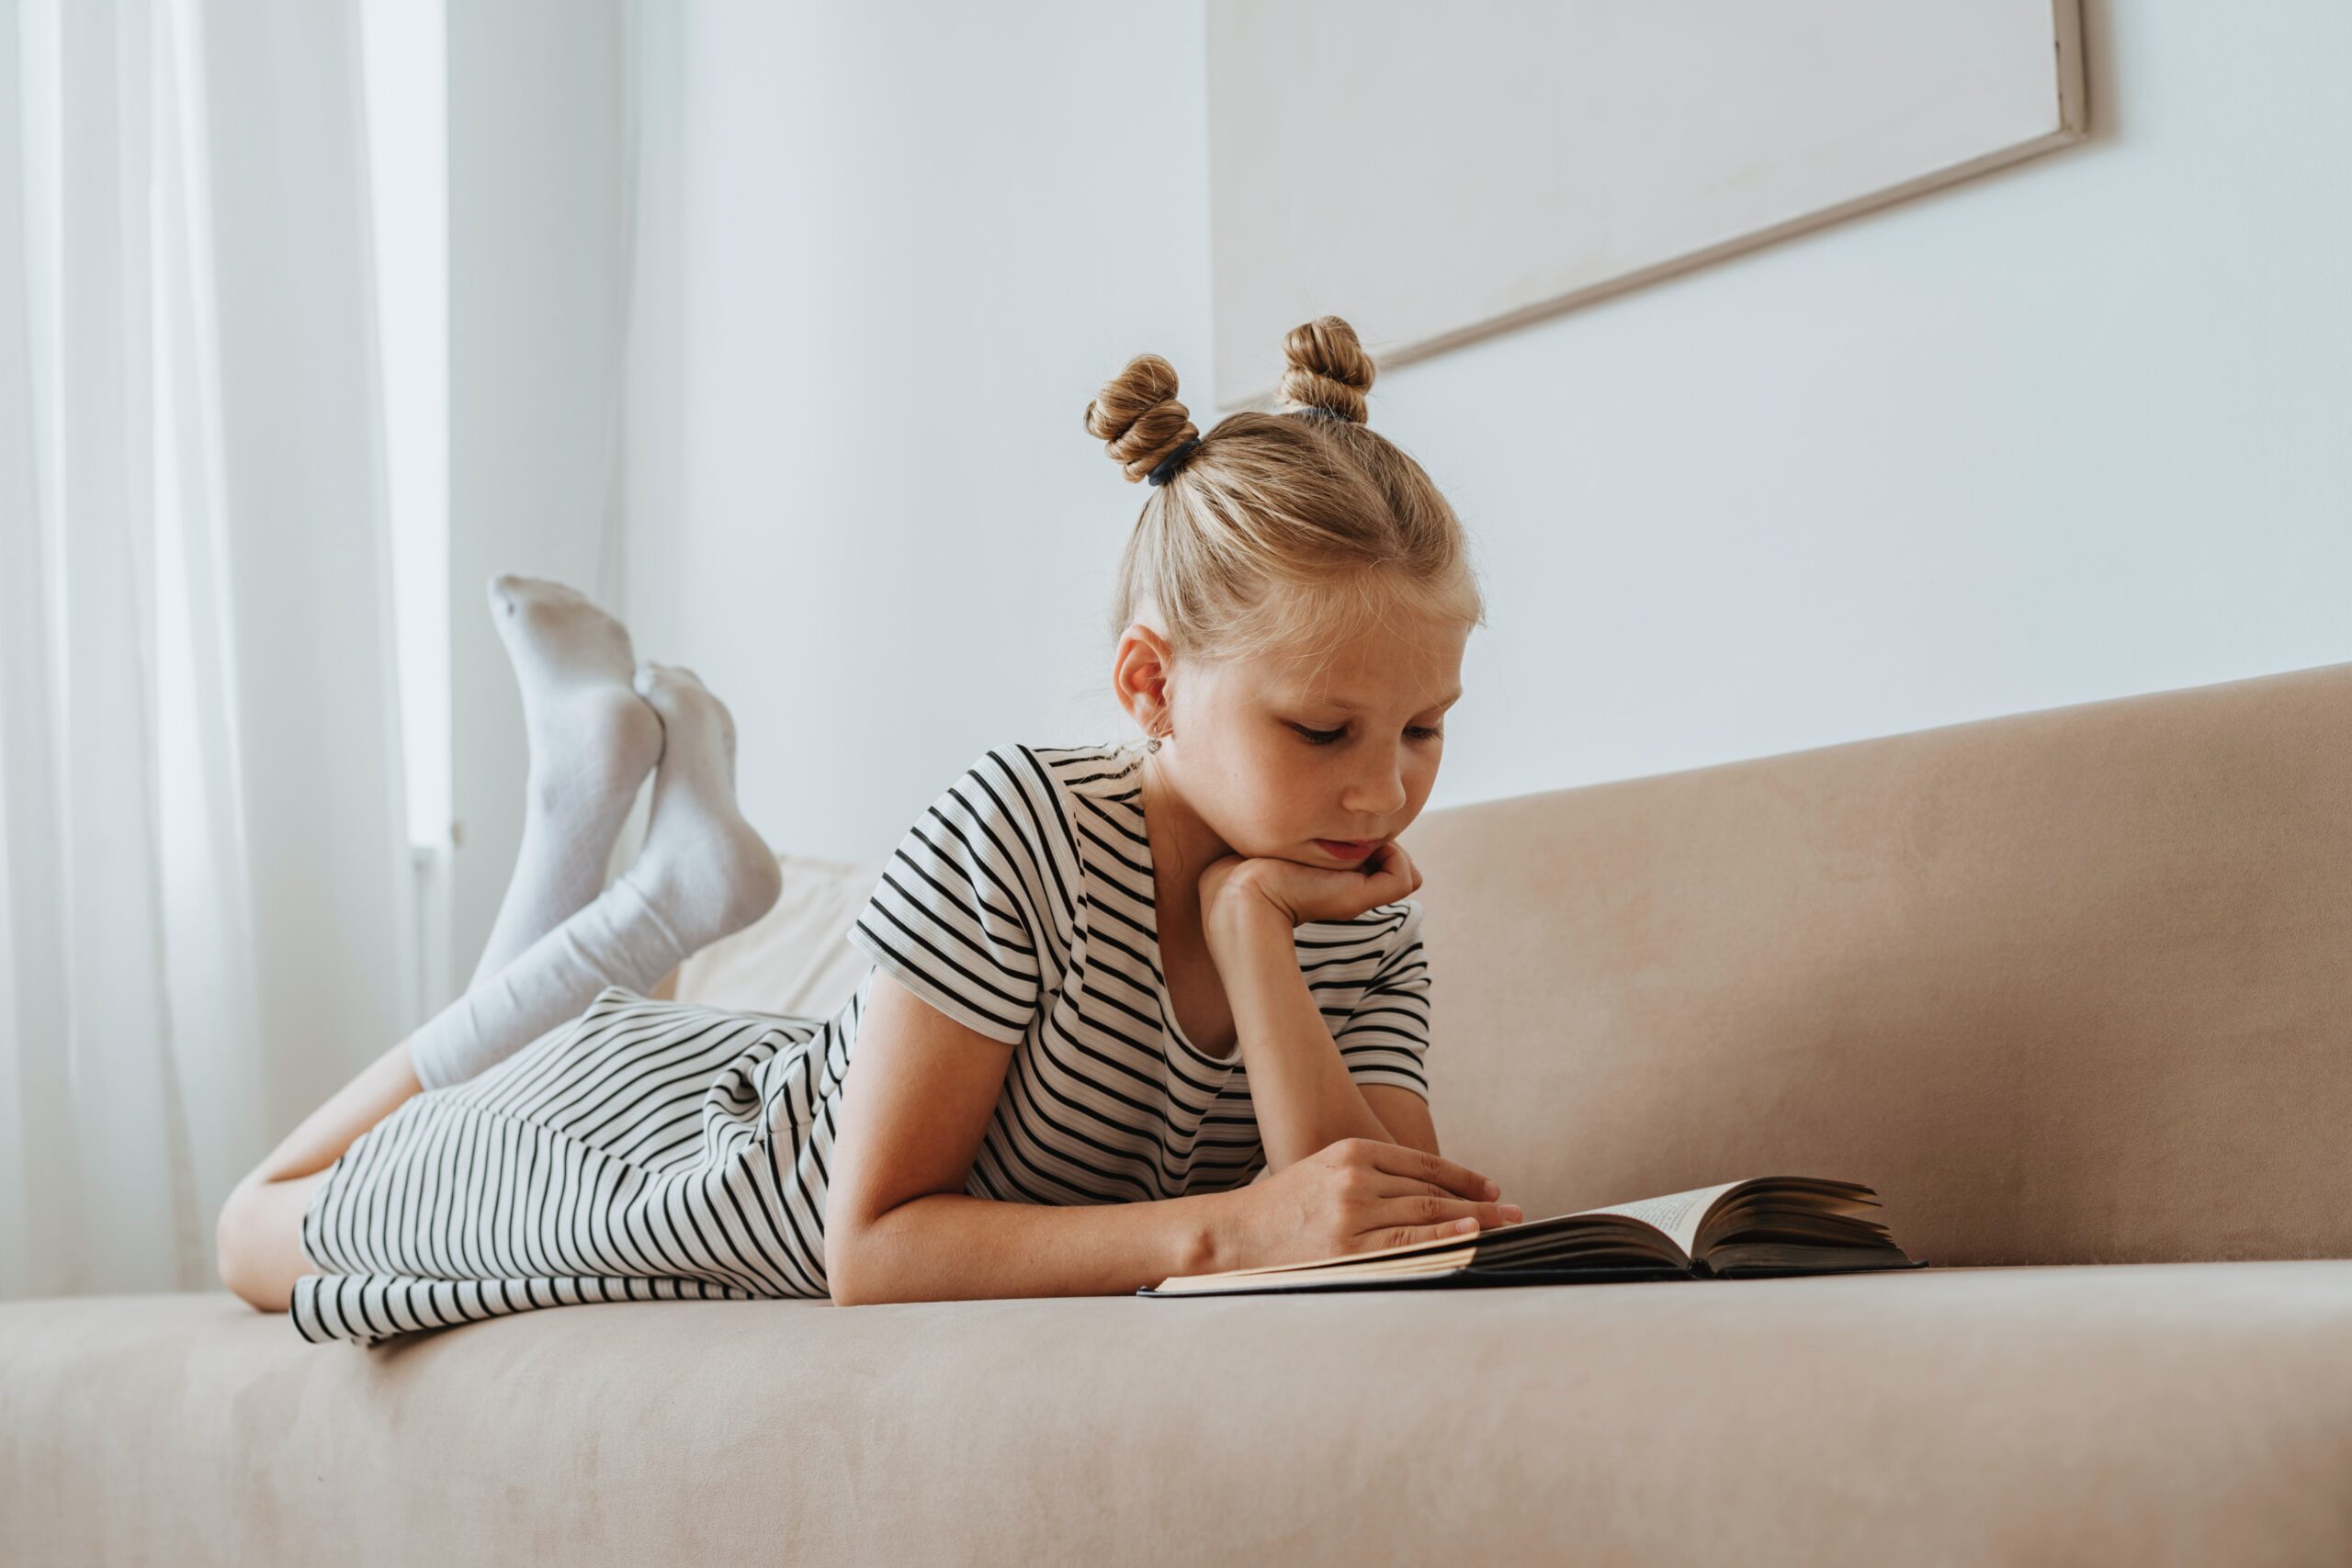 A young girl reads a book as she lies on her front on a couch.